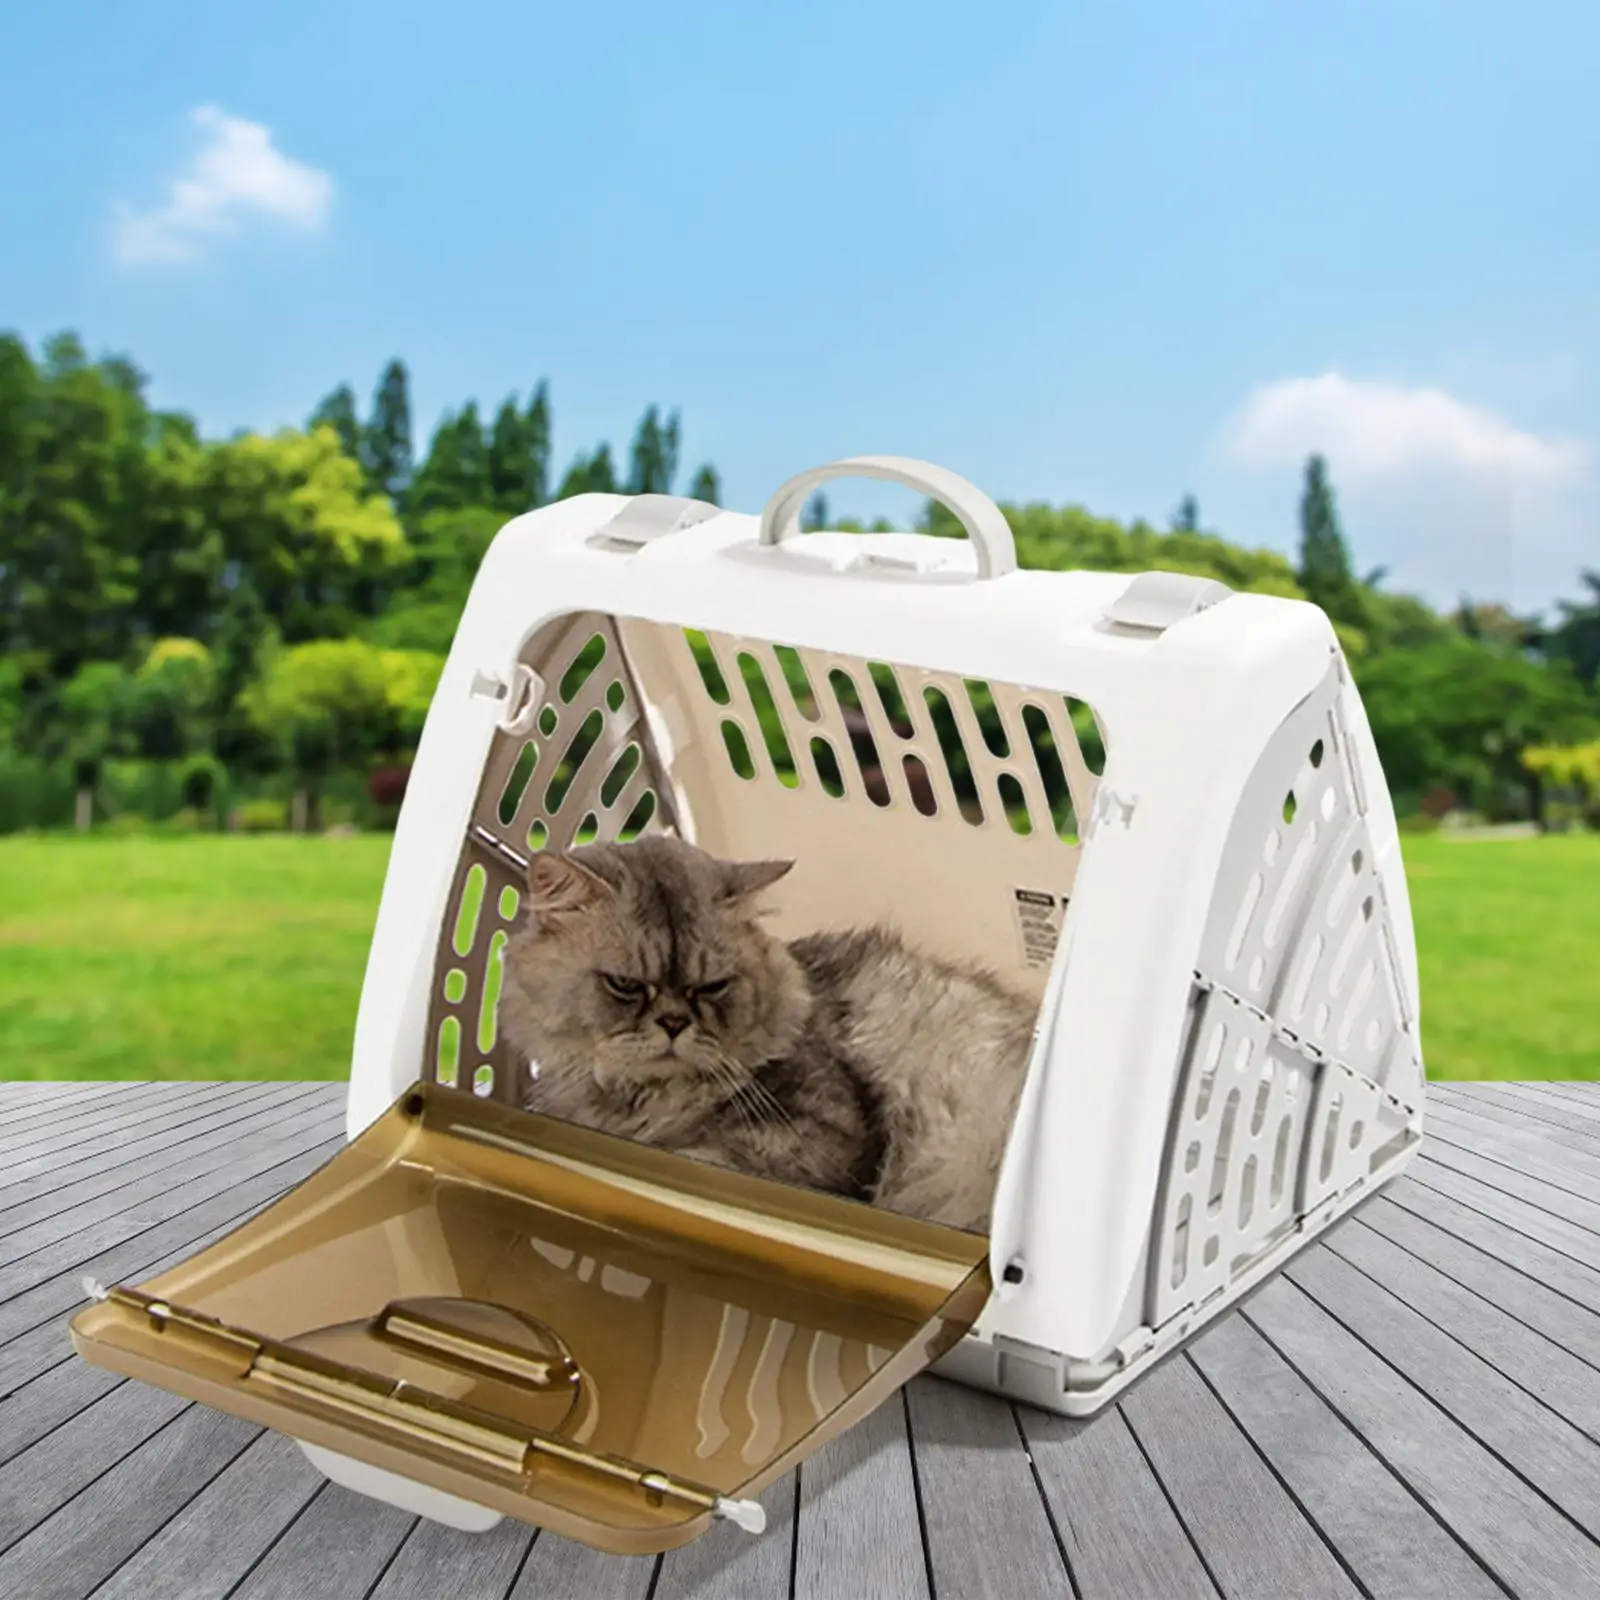 Foldable Cat Carrier Travel Bag Puppy Kitten Carrier Breathable Handbag Large Space Tote for Pets Grooming Travel Outdoor